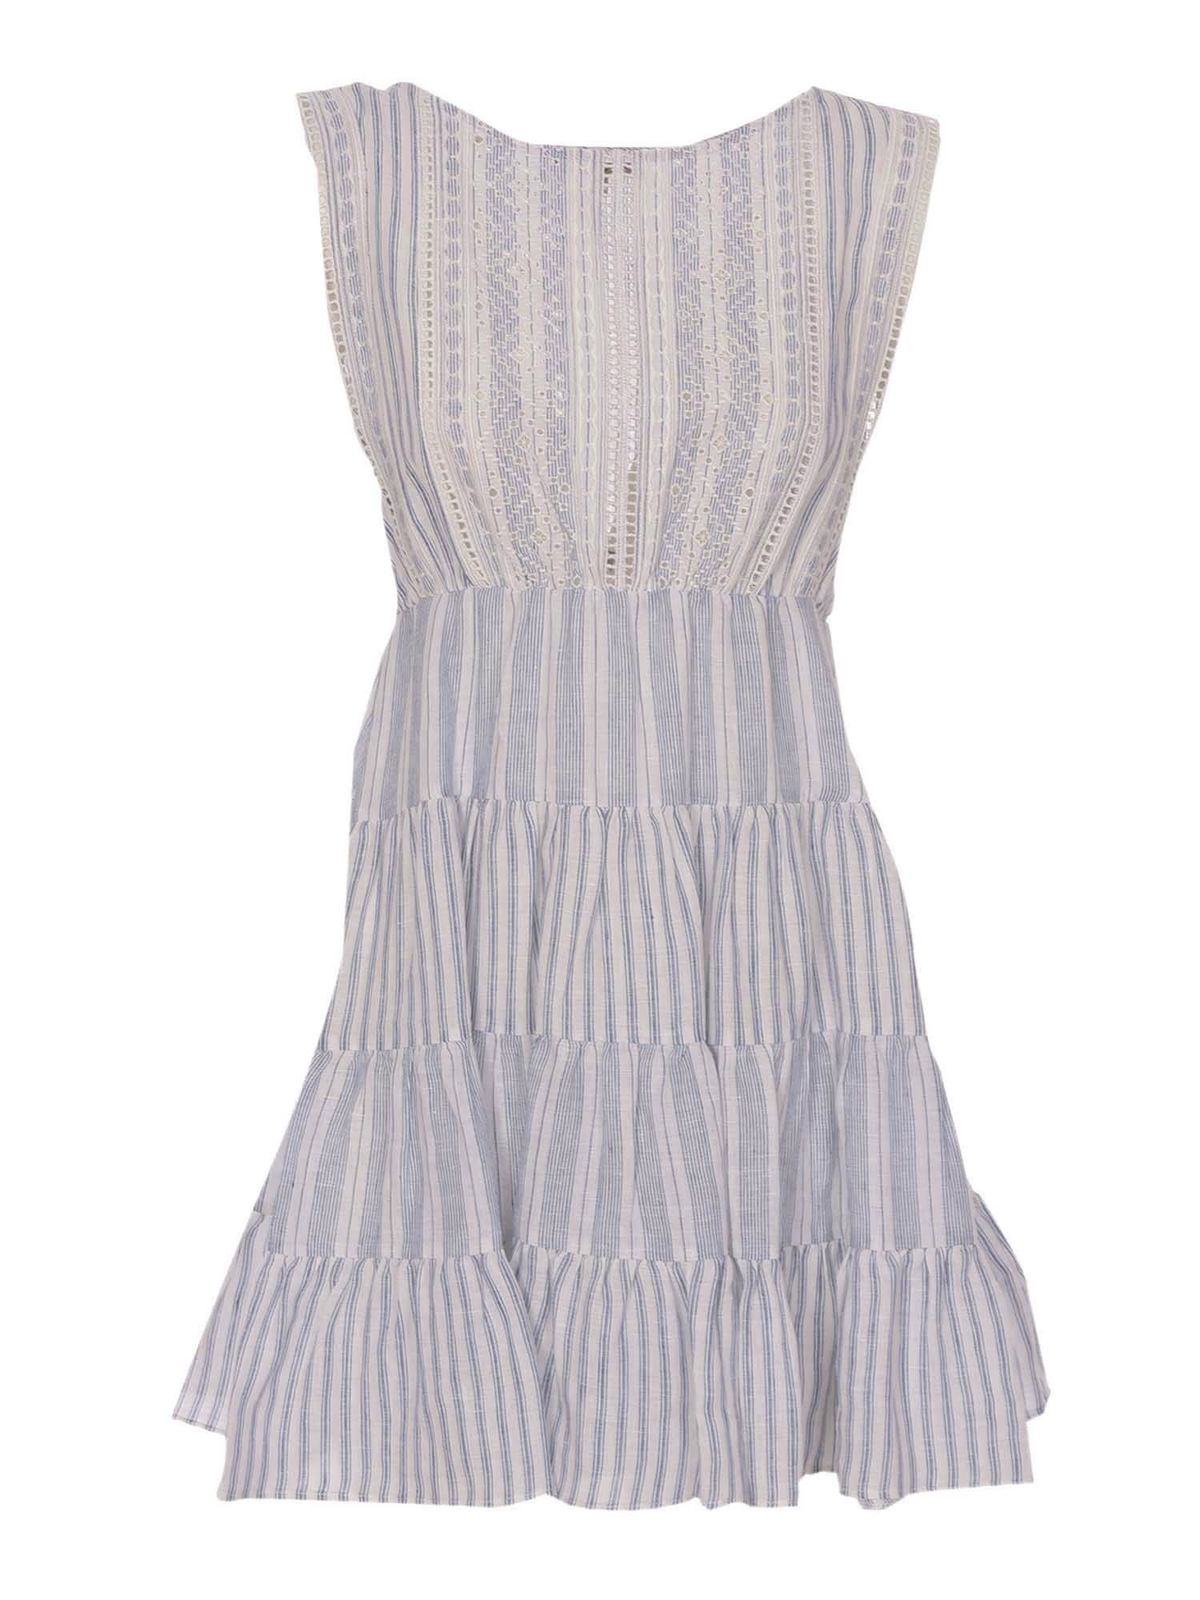 ERMANNO SCERVINO EMBROIERED STRIPED DRESS IN BLUE AND WHITE